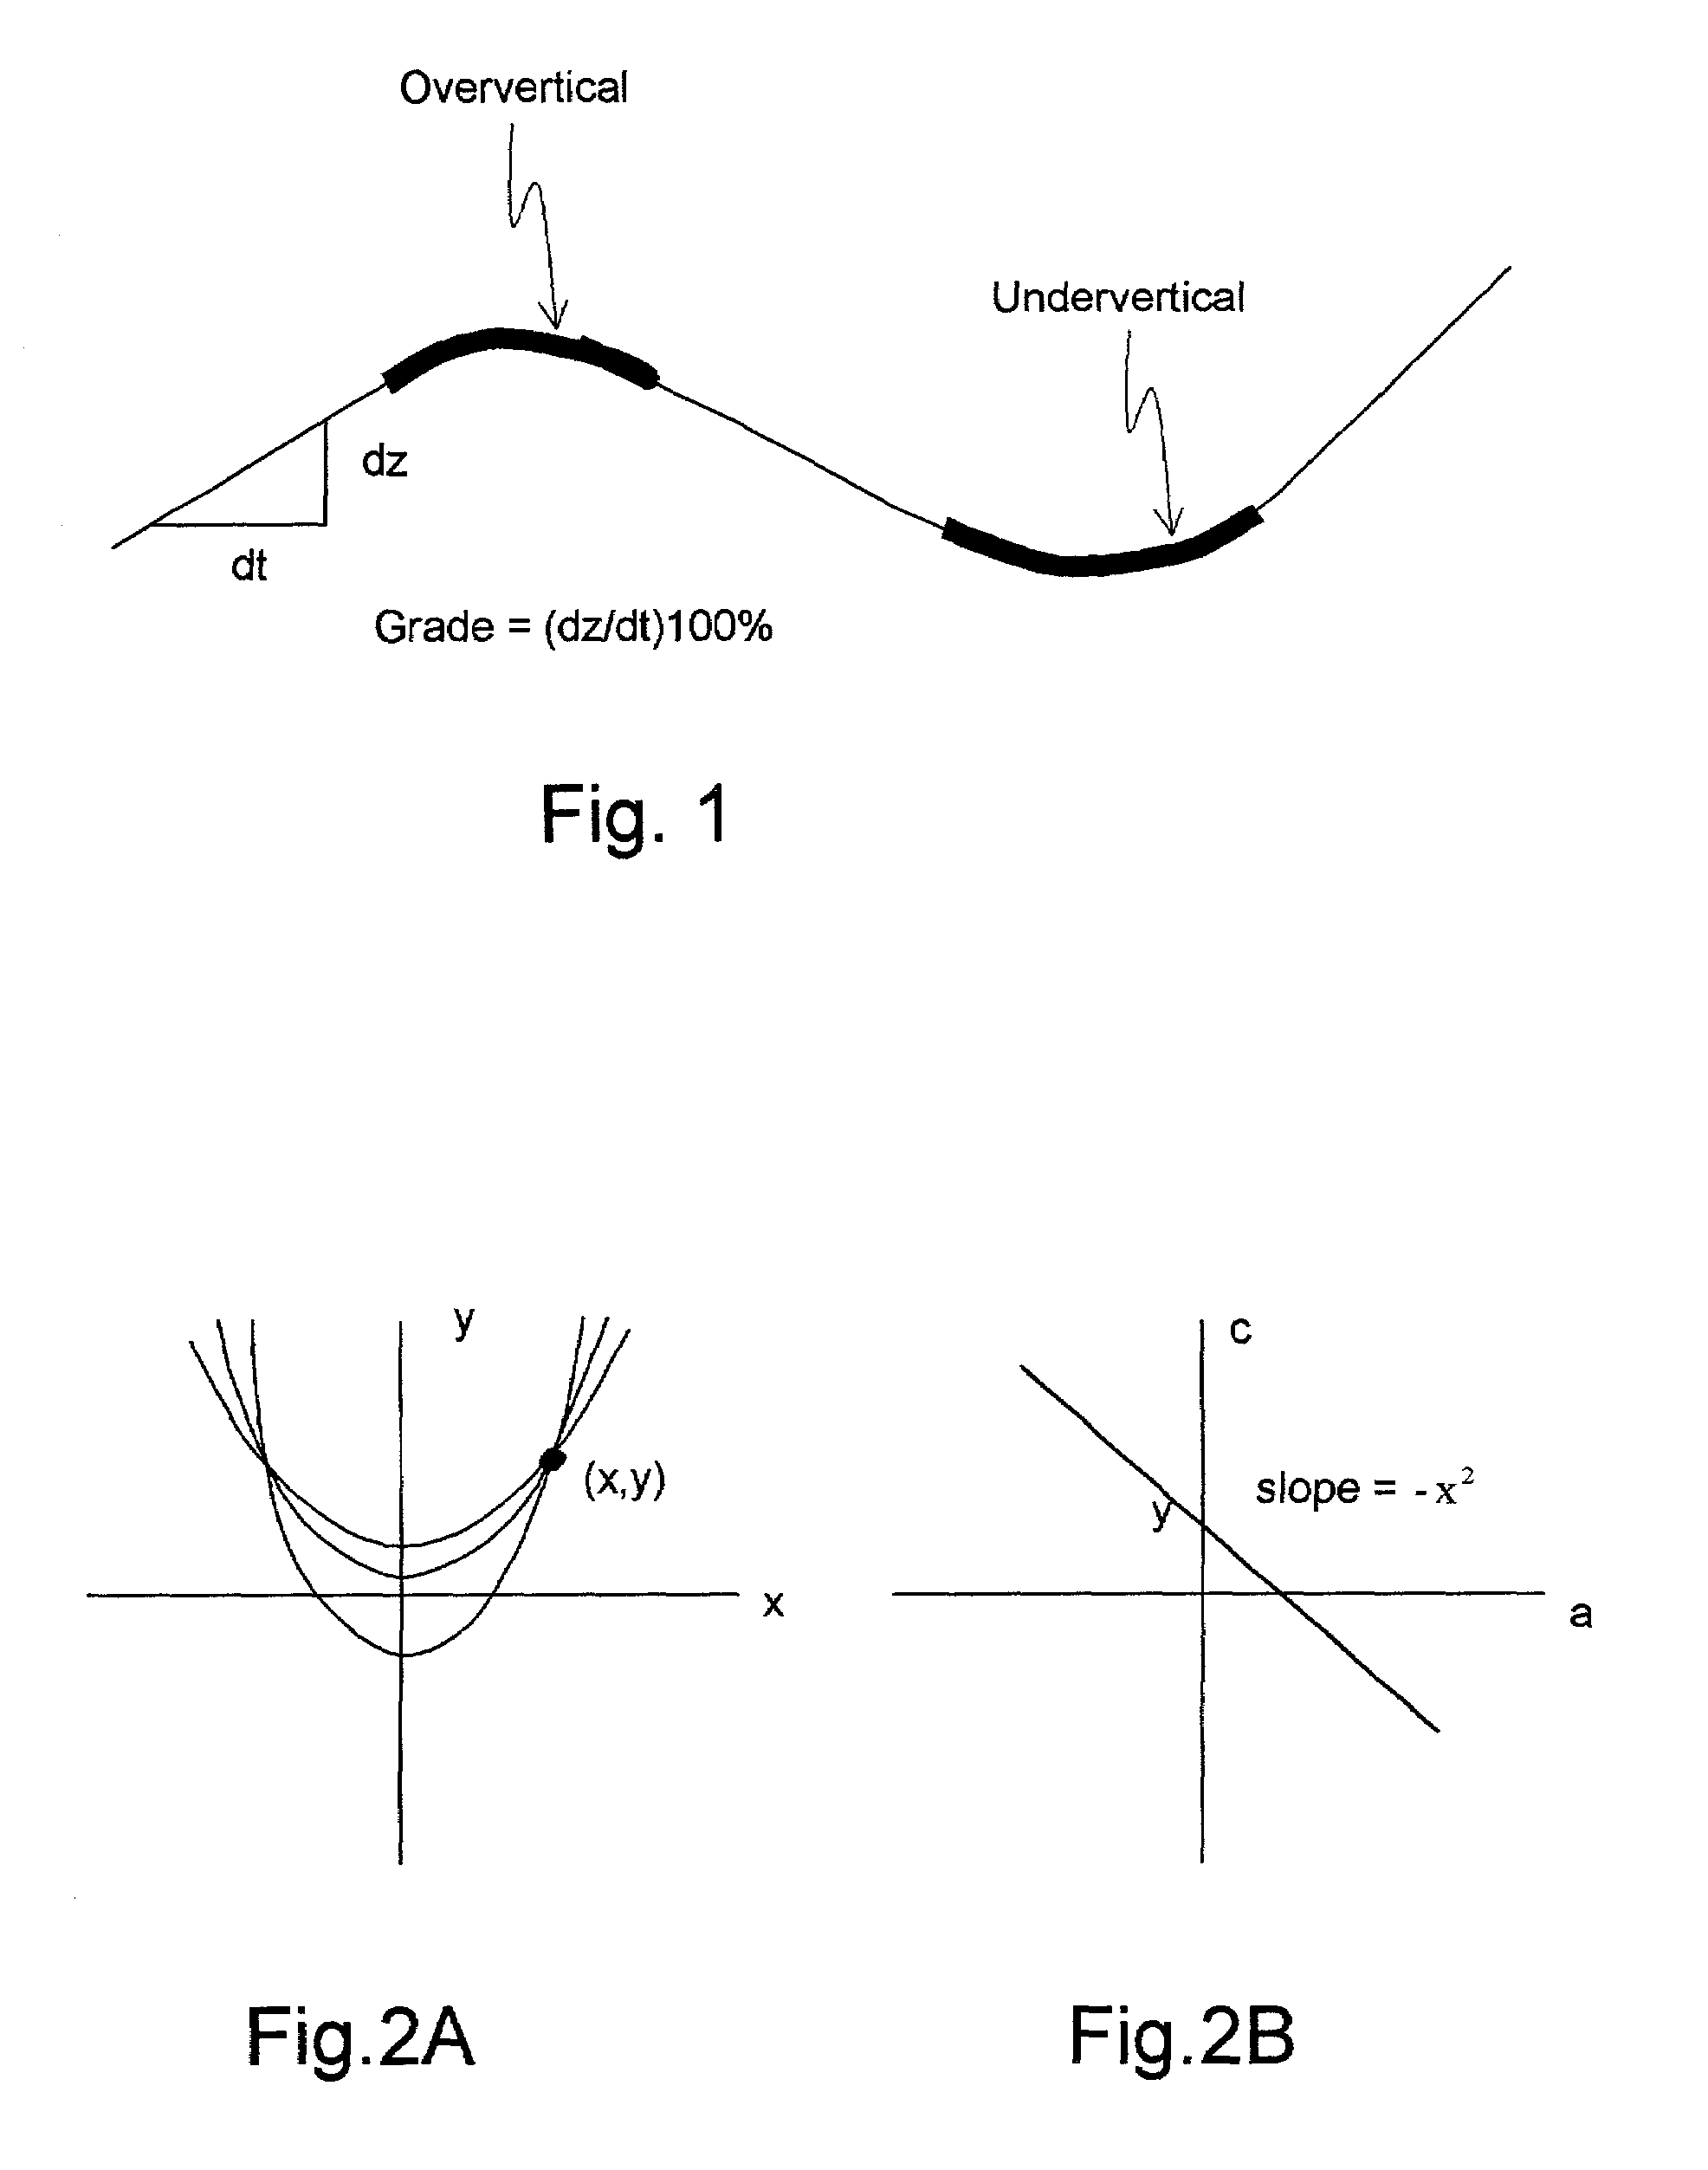 Method for representing the vertical component of road geometry and computing grade or slope